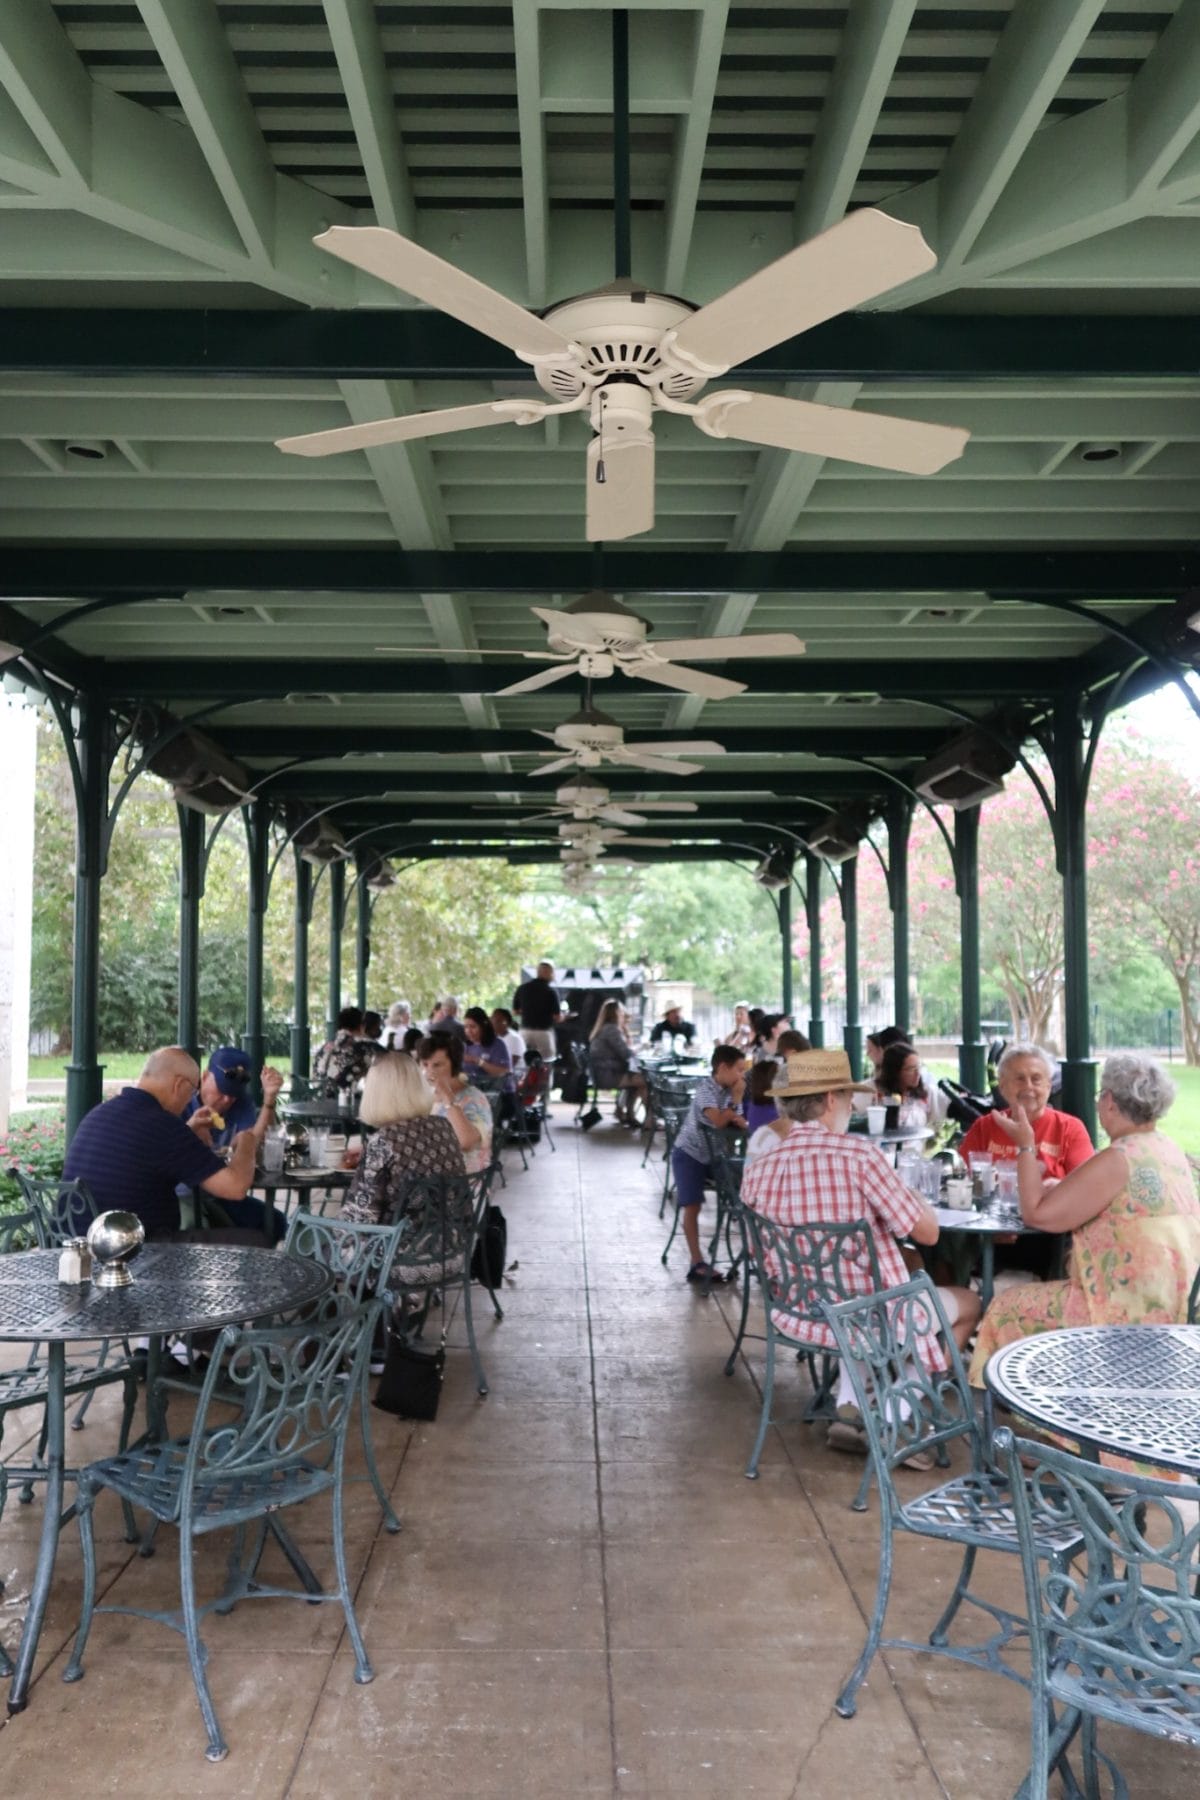 48 hours in San Antonio - eating lunch outside